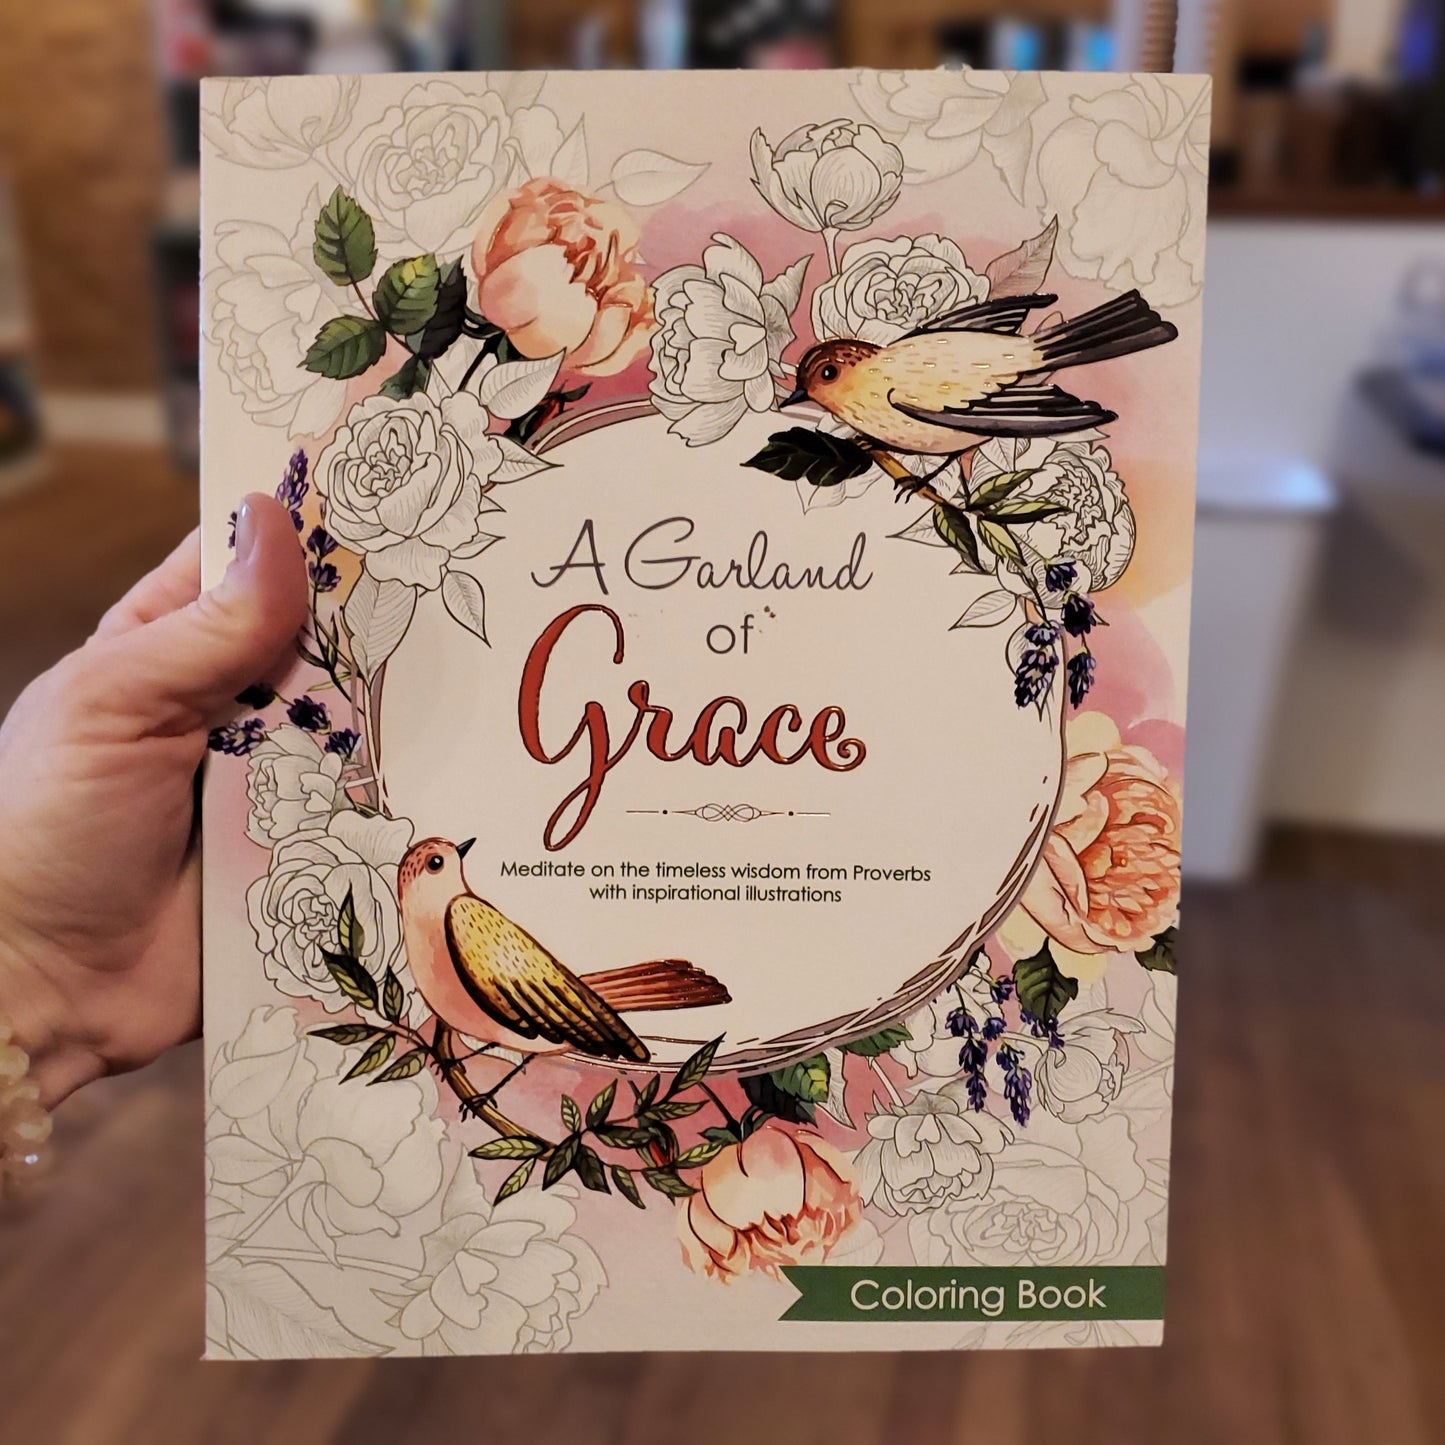 Coloring Book - A Garland of Grace